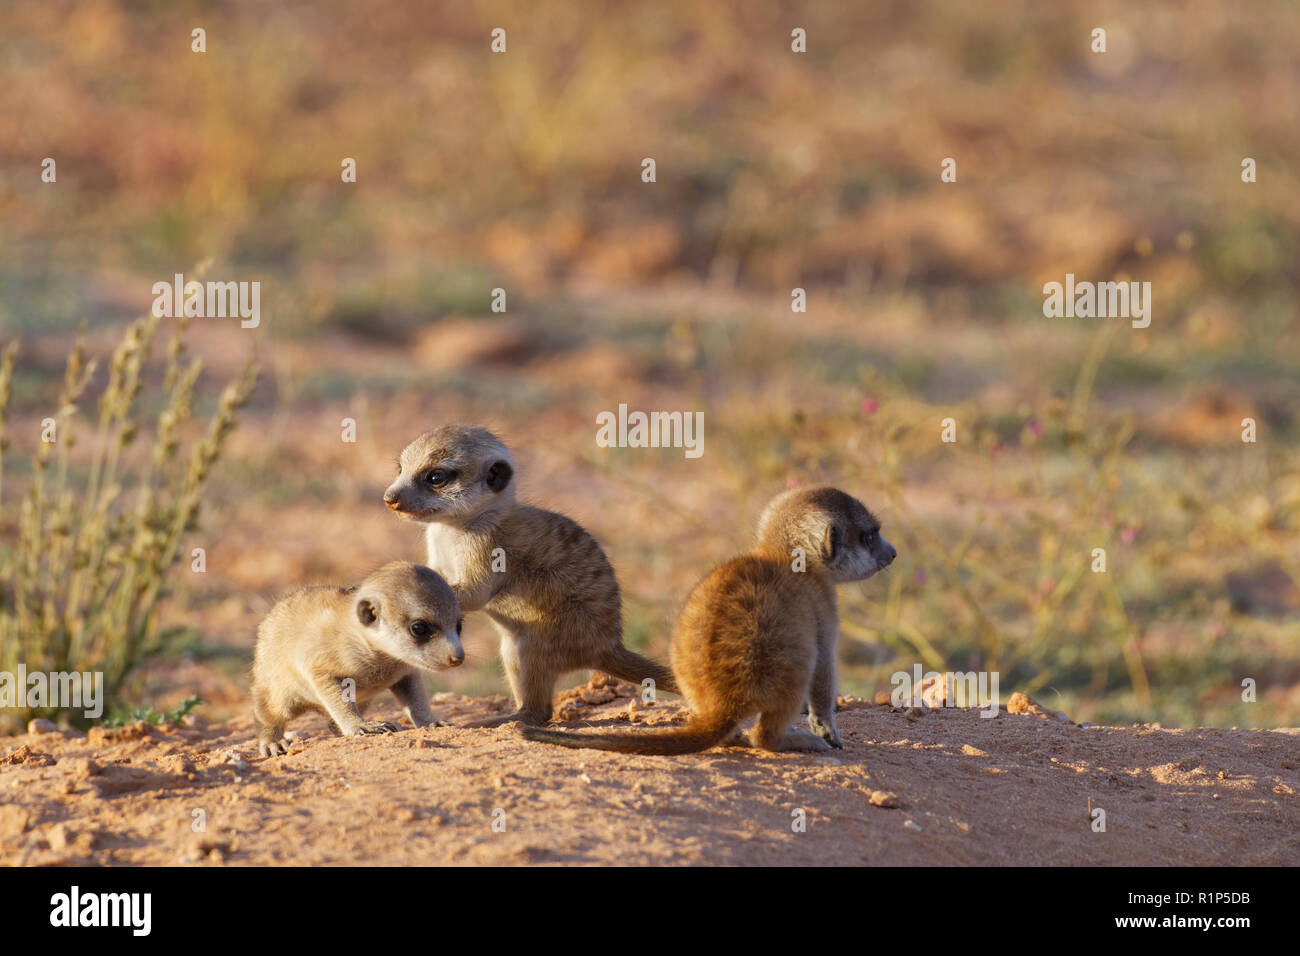 Meerkats (Suricata suricatta), three young males at burrow observing the surroundings, Kgalagadi Transfrontier Park, Northern Cape,South Africa,Africa Stock Photo